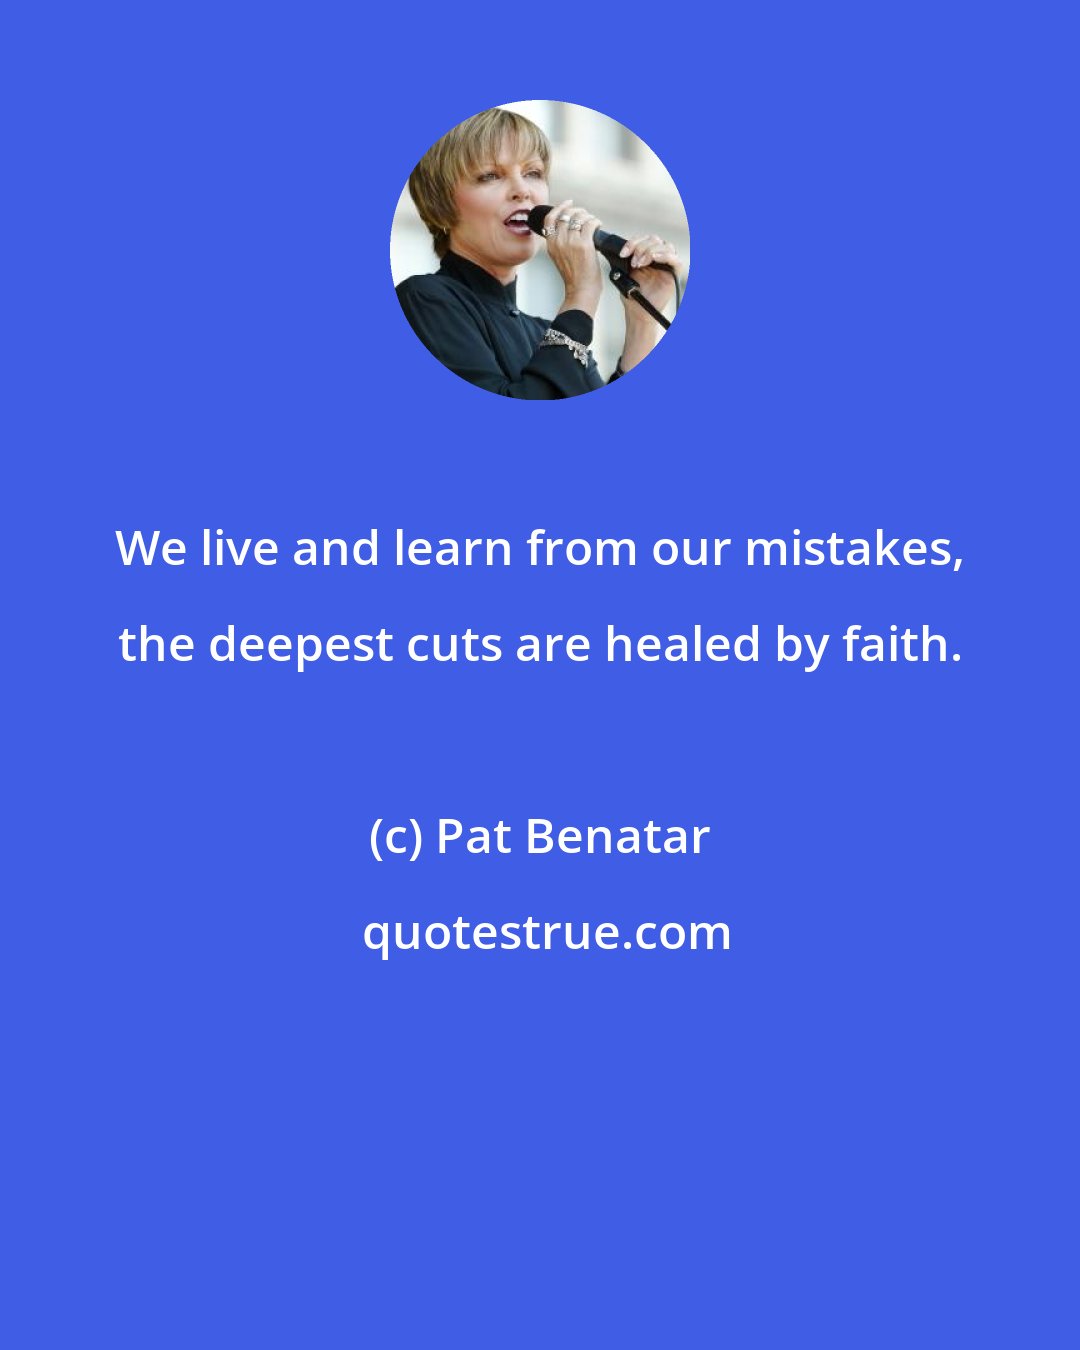 Pat Benatar: We live and learn from our mistakes, the deepest cuts are healed by faith.